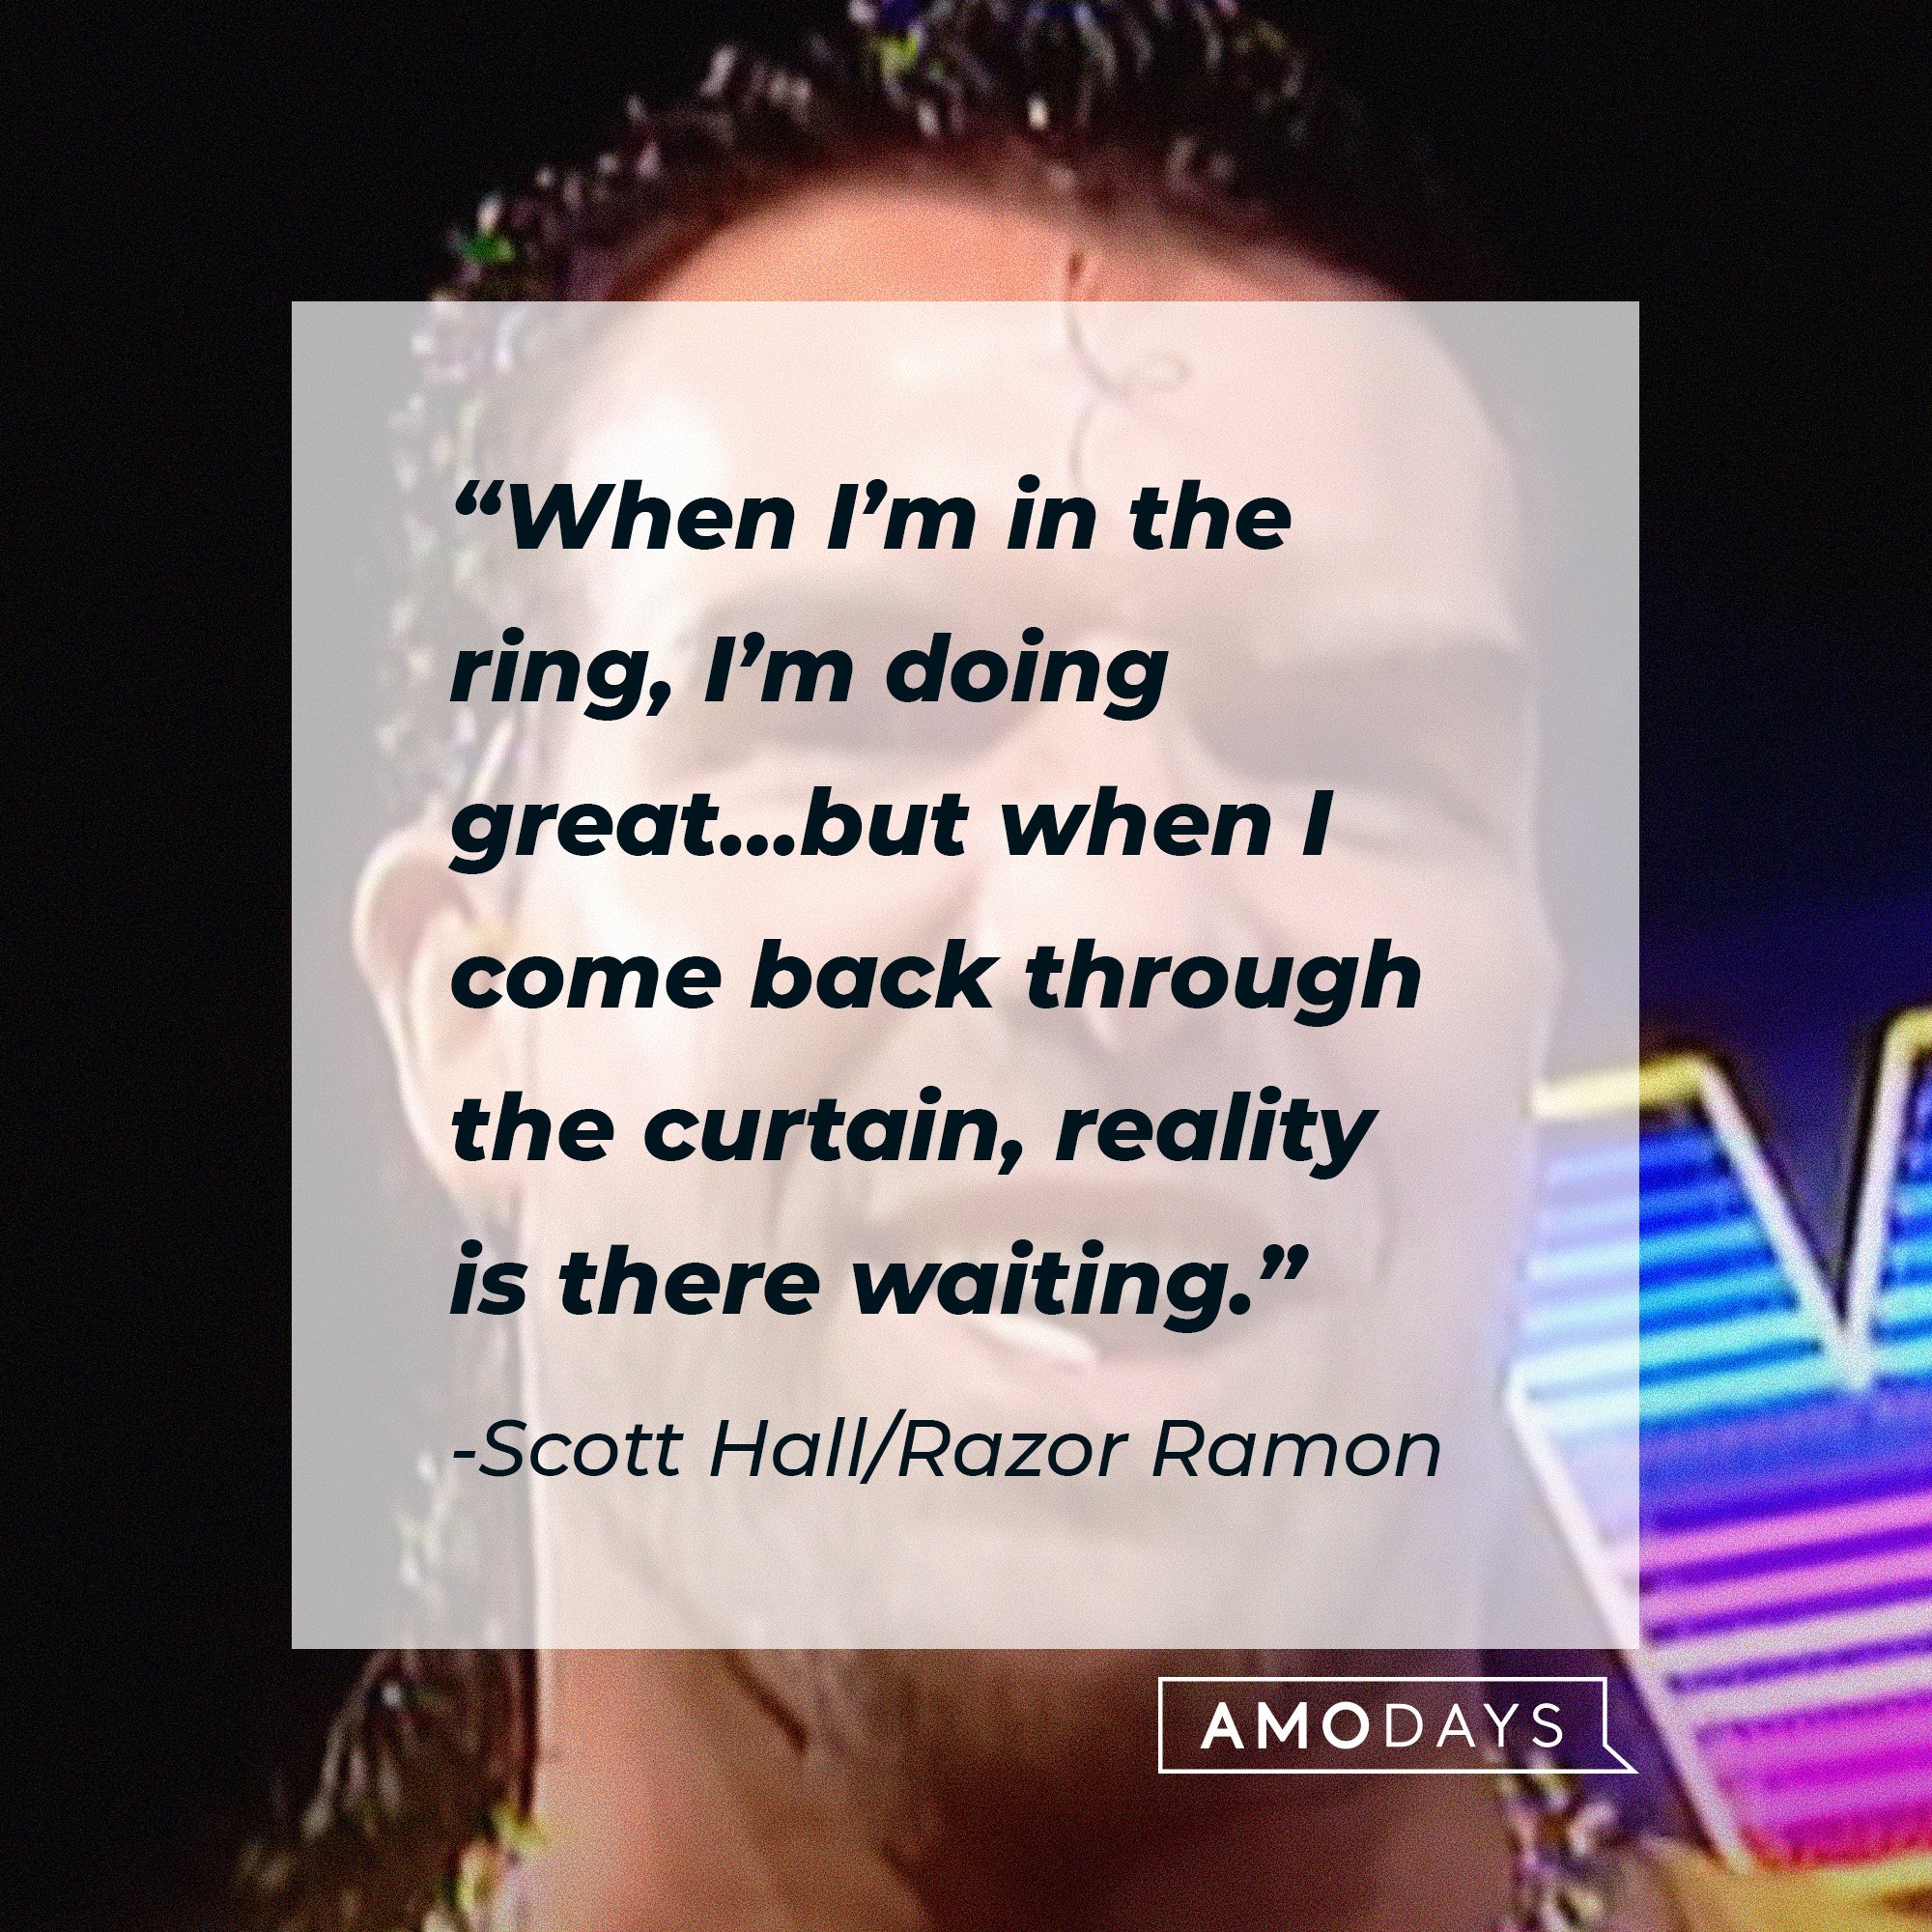 Scott Hall/Razor Ramon’s quote: "When I'm in the ring, I'm doing great…but when I come back through the curtain, reality is there waiting." | Image: AmoDays